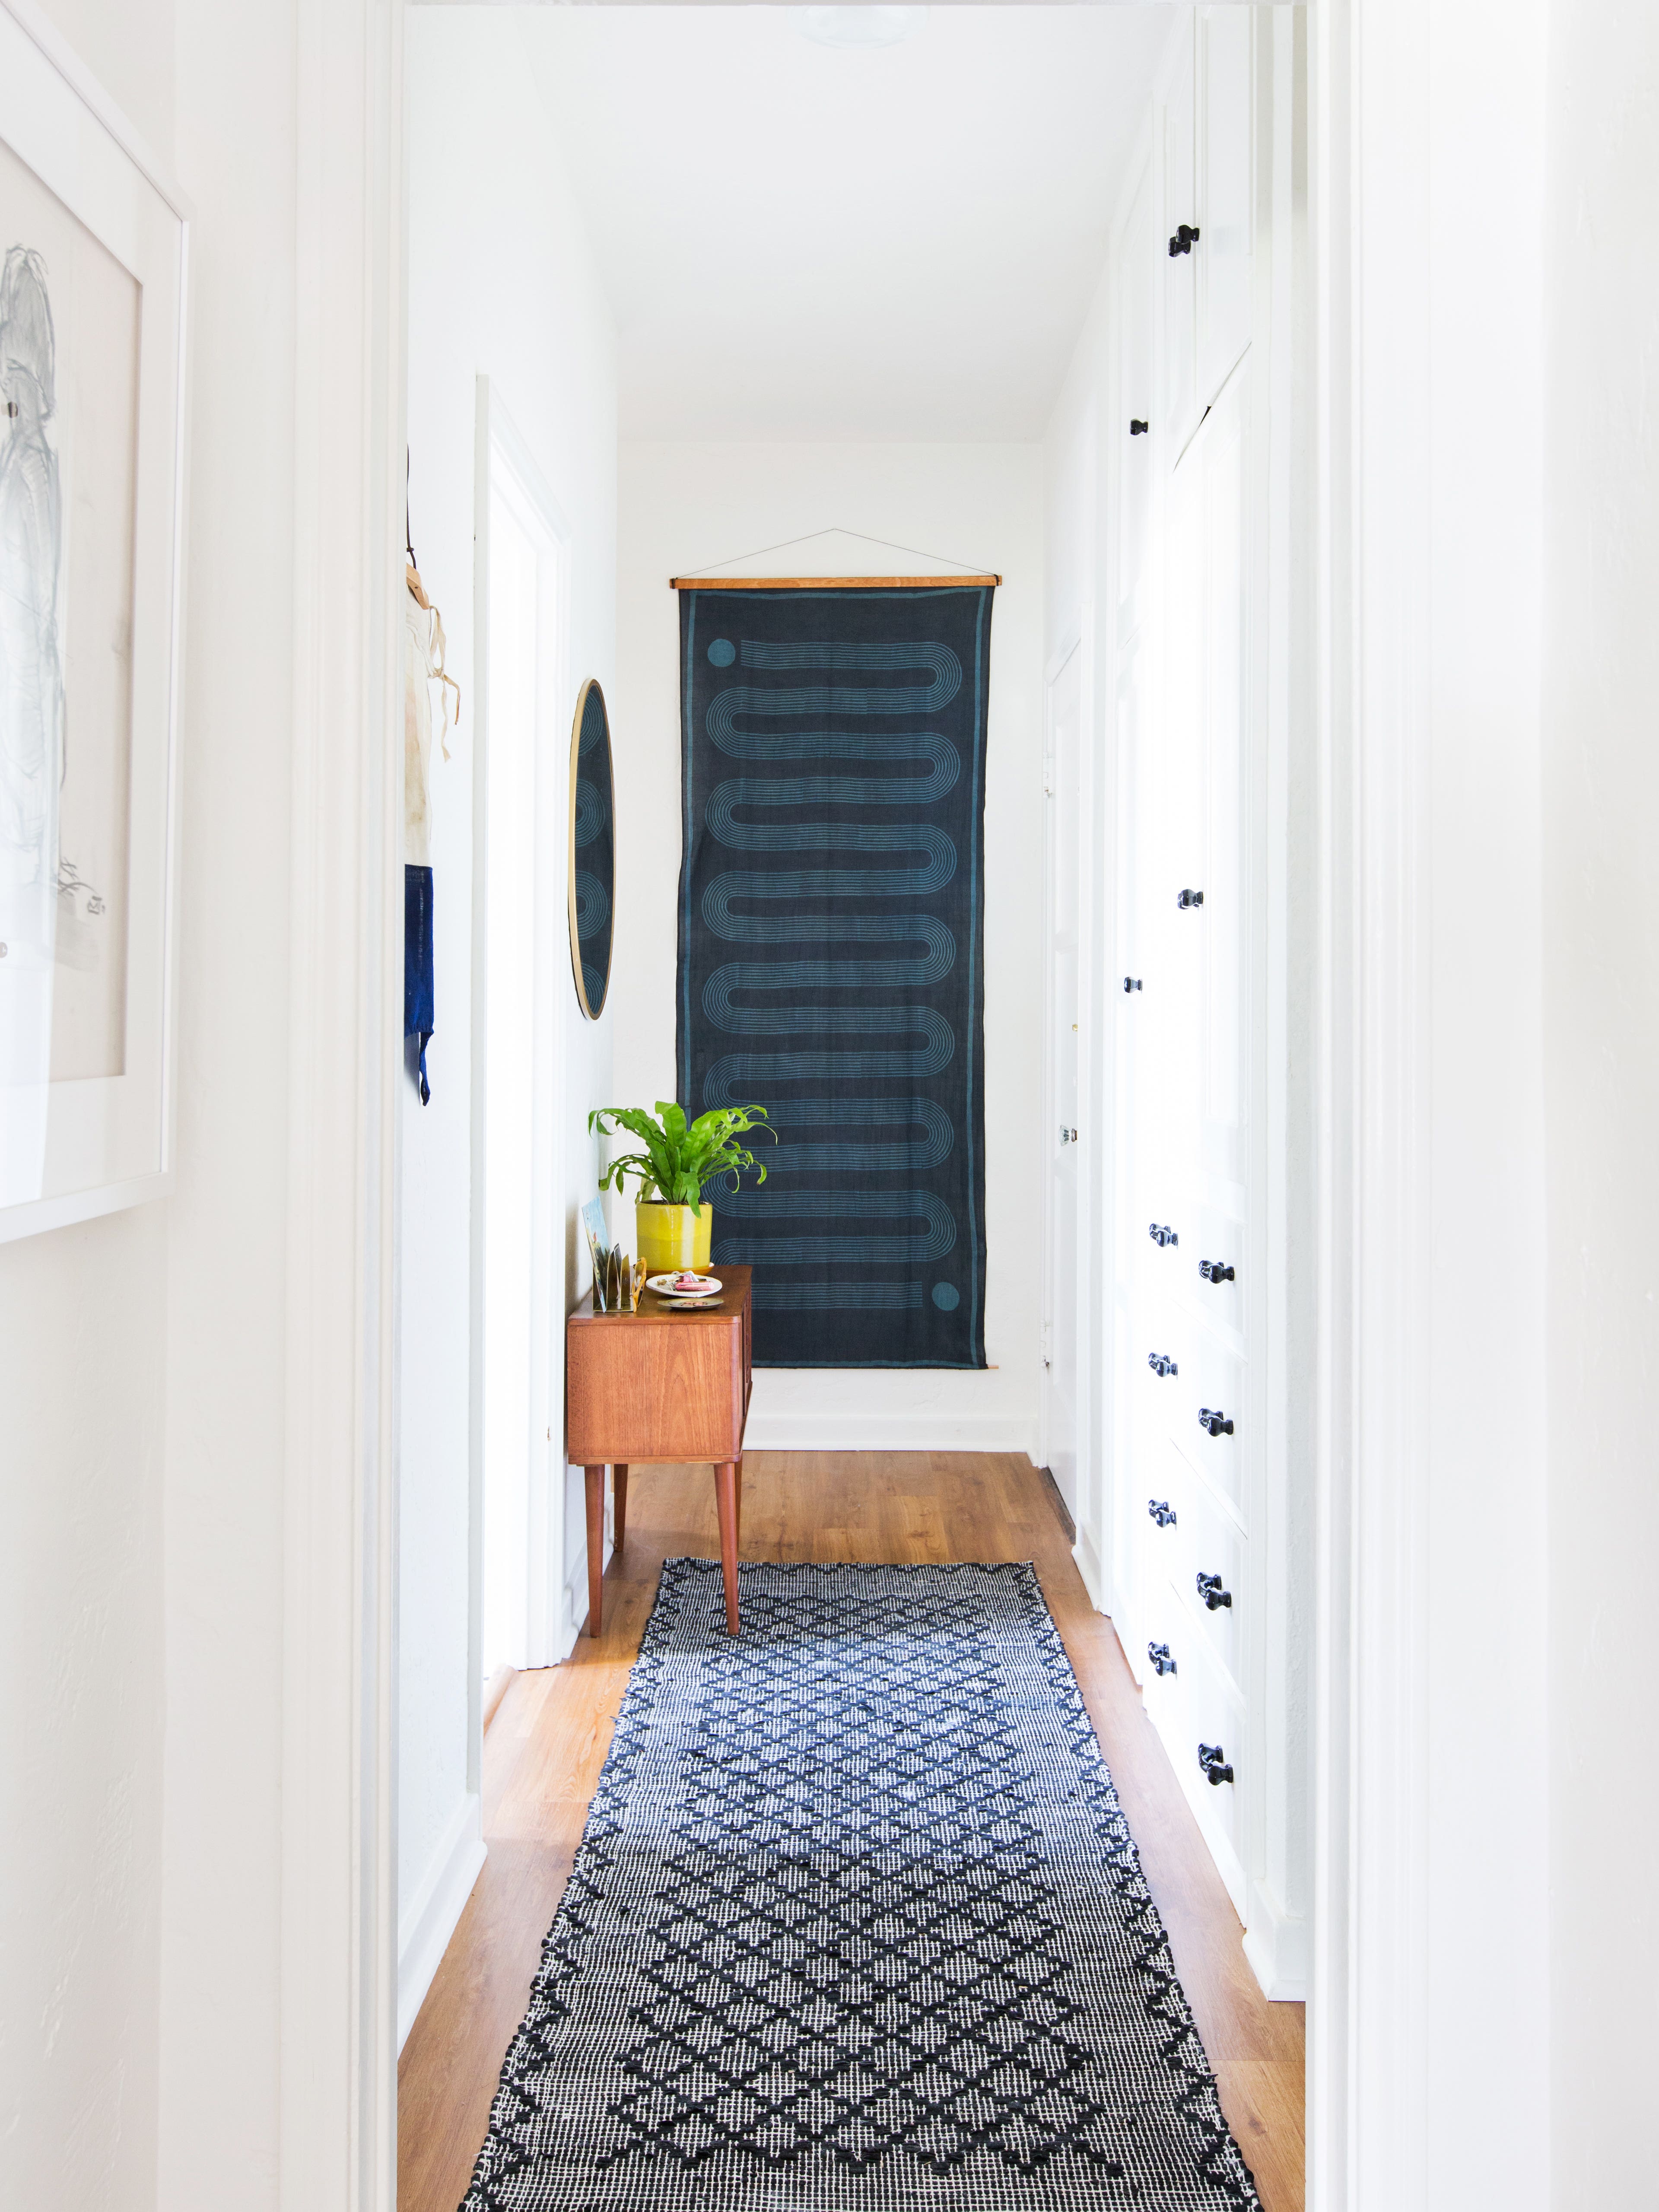 white hallway with a blue runner and blue wall hanging at the end